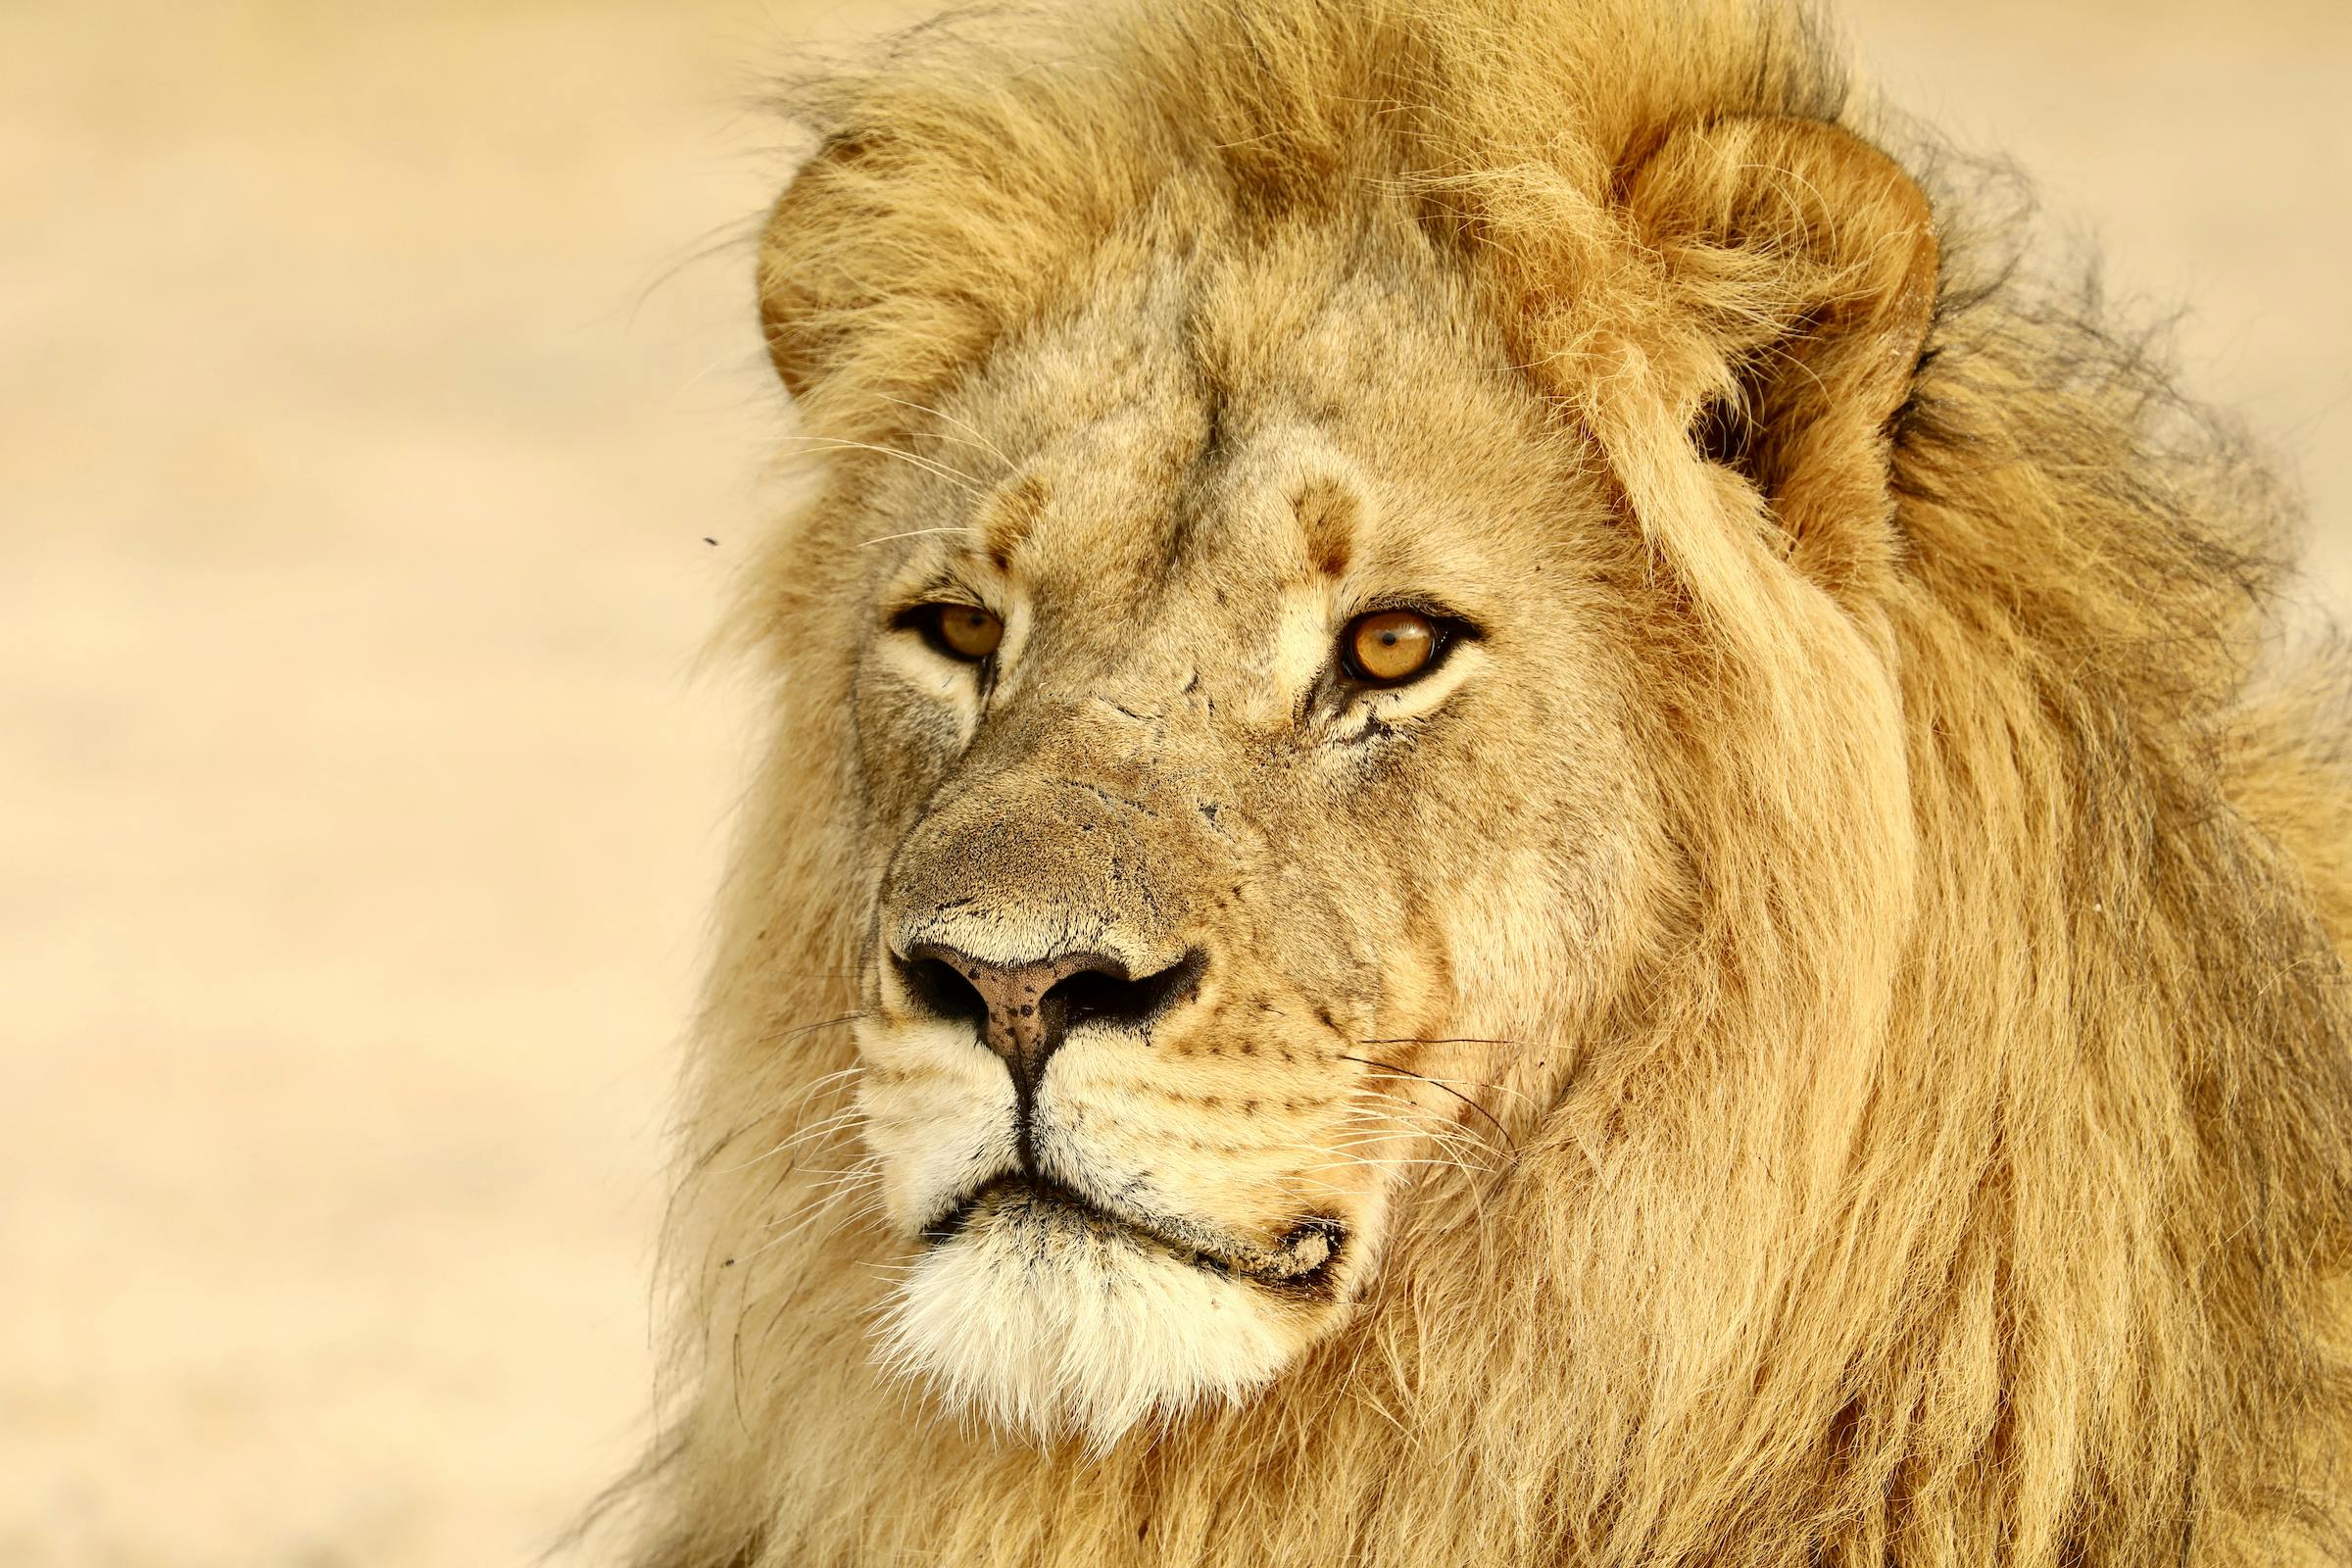 The Impact of the LRF and the Lionscape Coalition